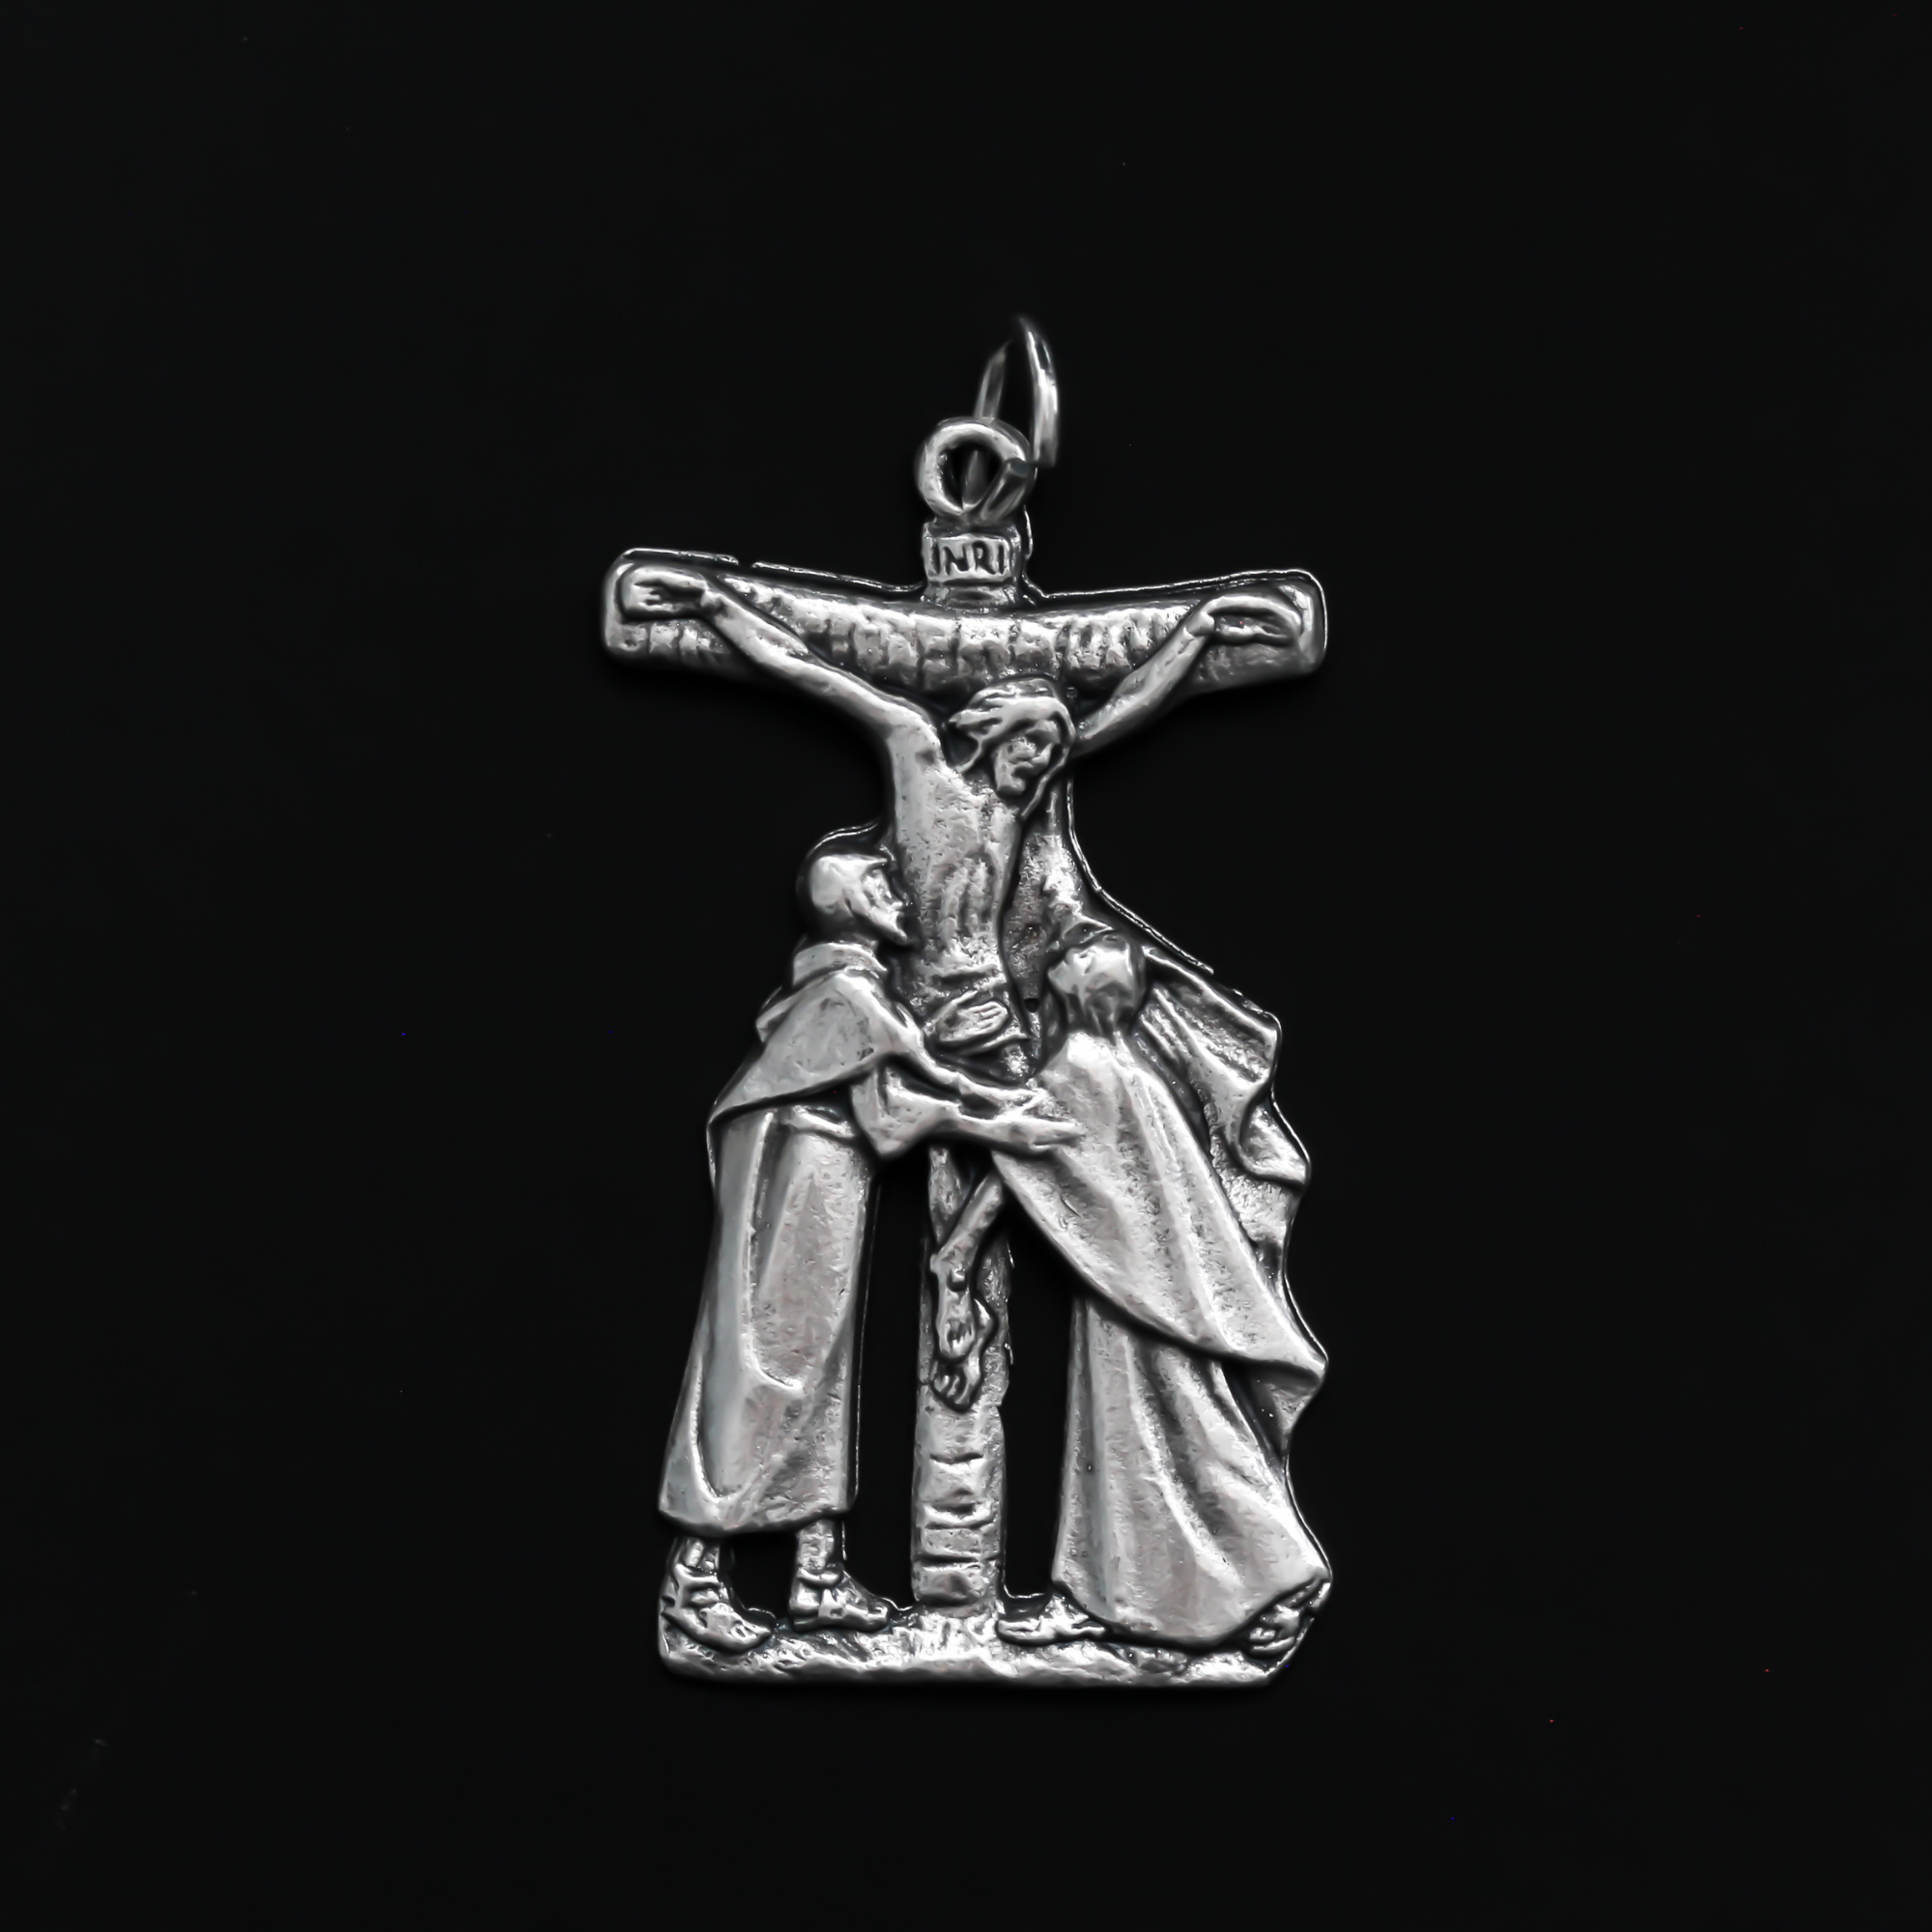 Crucifixion pendant that depicts Christ on the cross between the Virgin Mary and St. John the Beloved